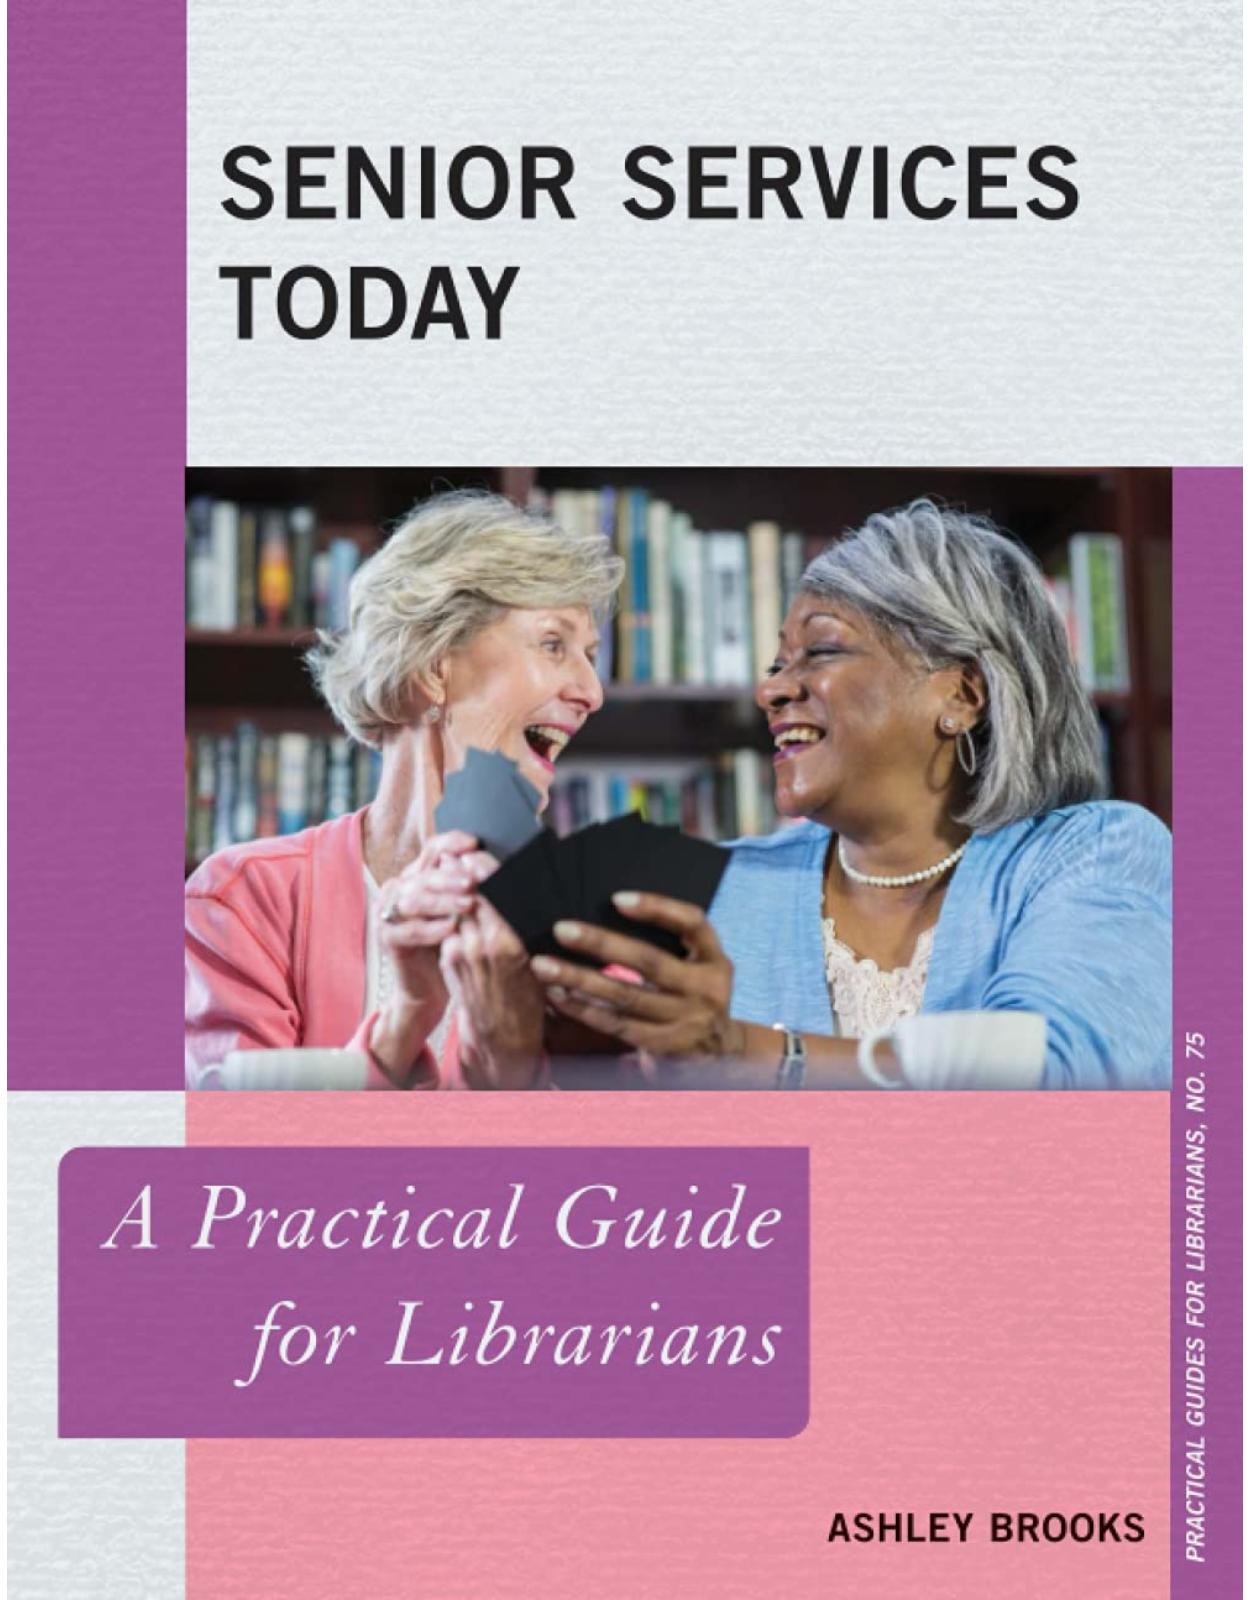 Senior Services Today: A Practical Guide for Librarians: 75 (Practical Guides for Librarians)